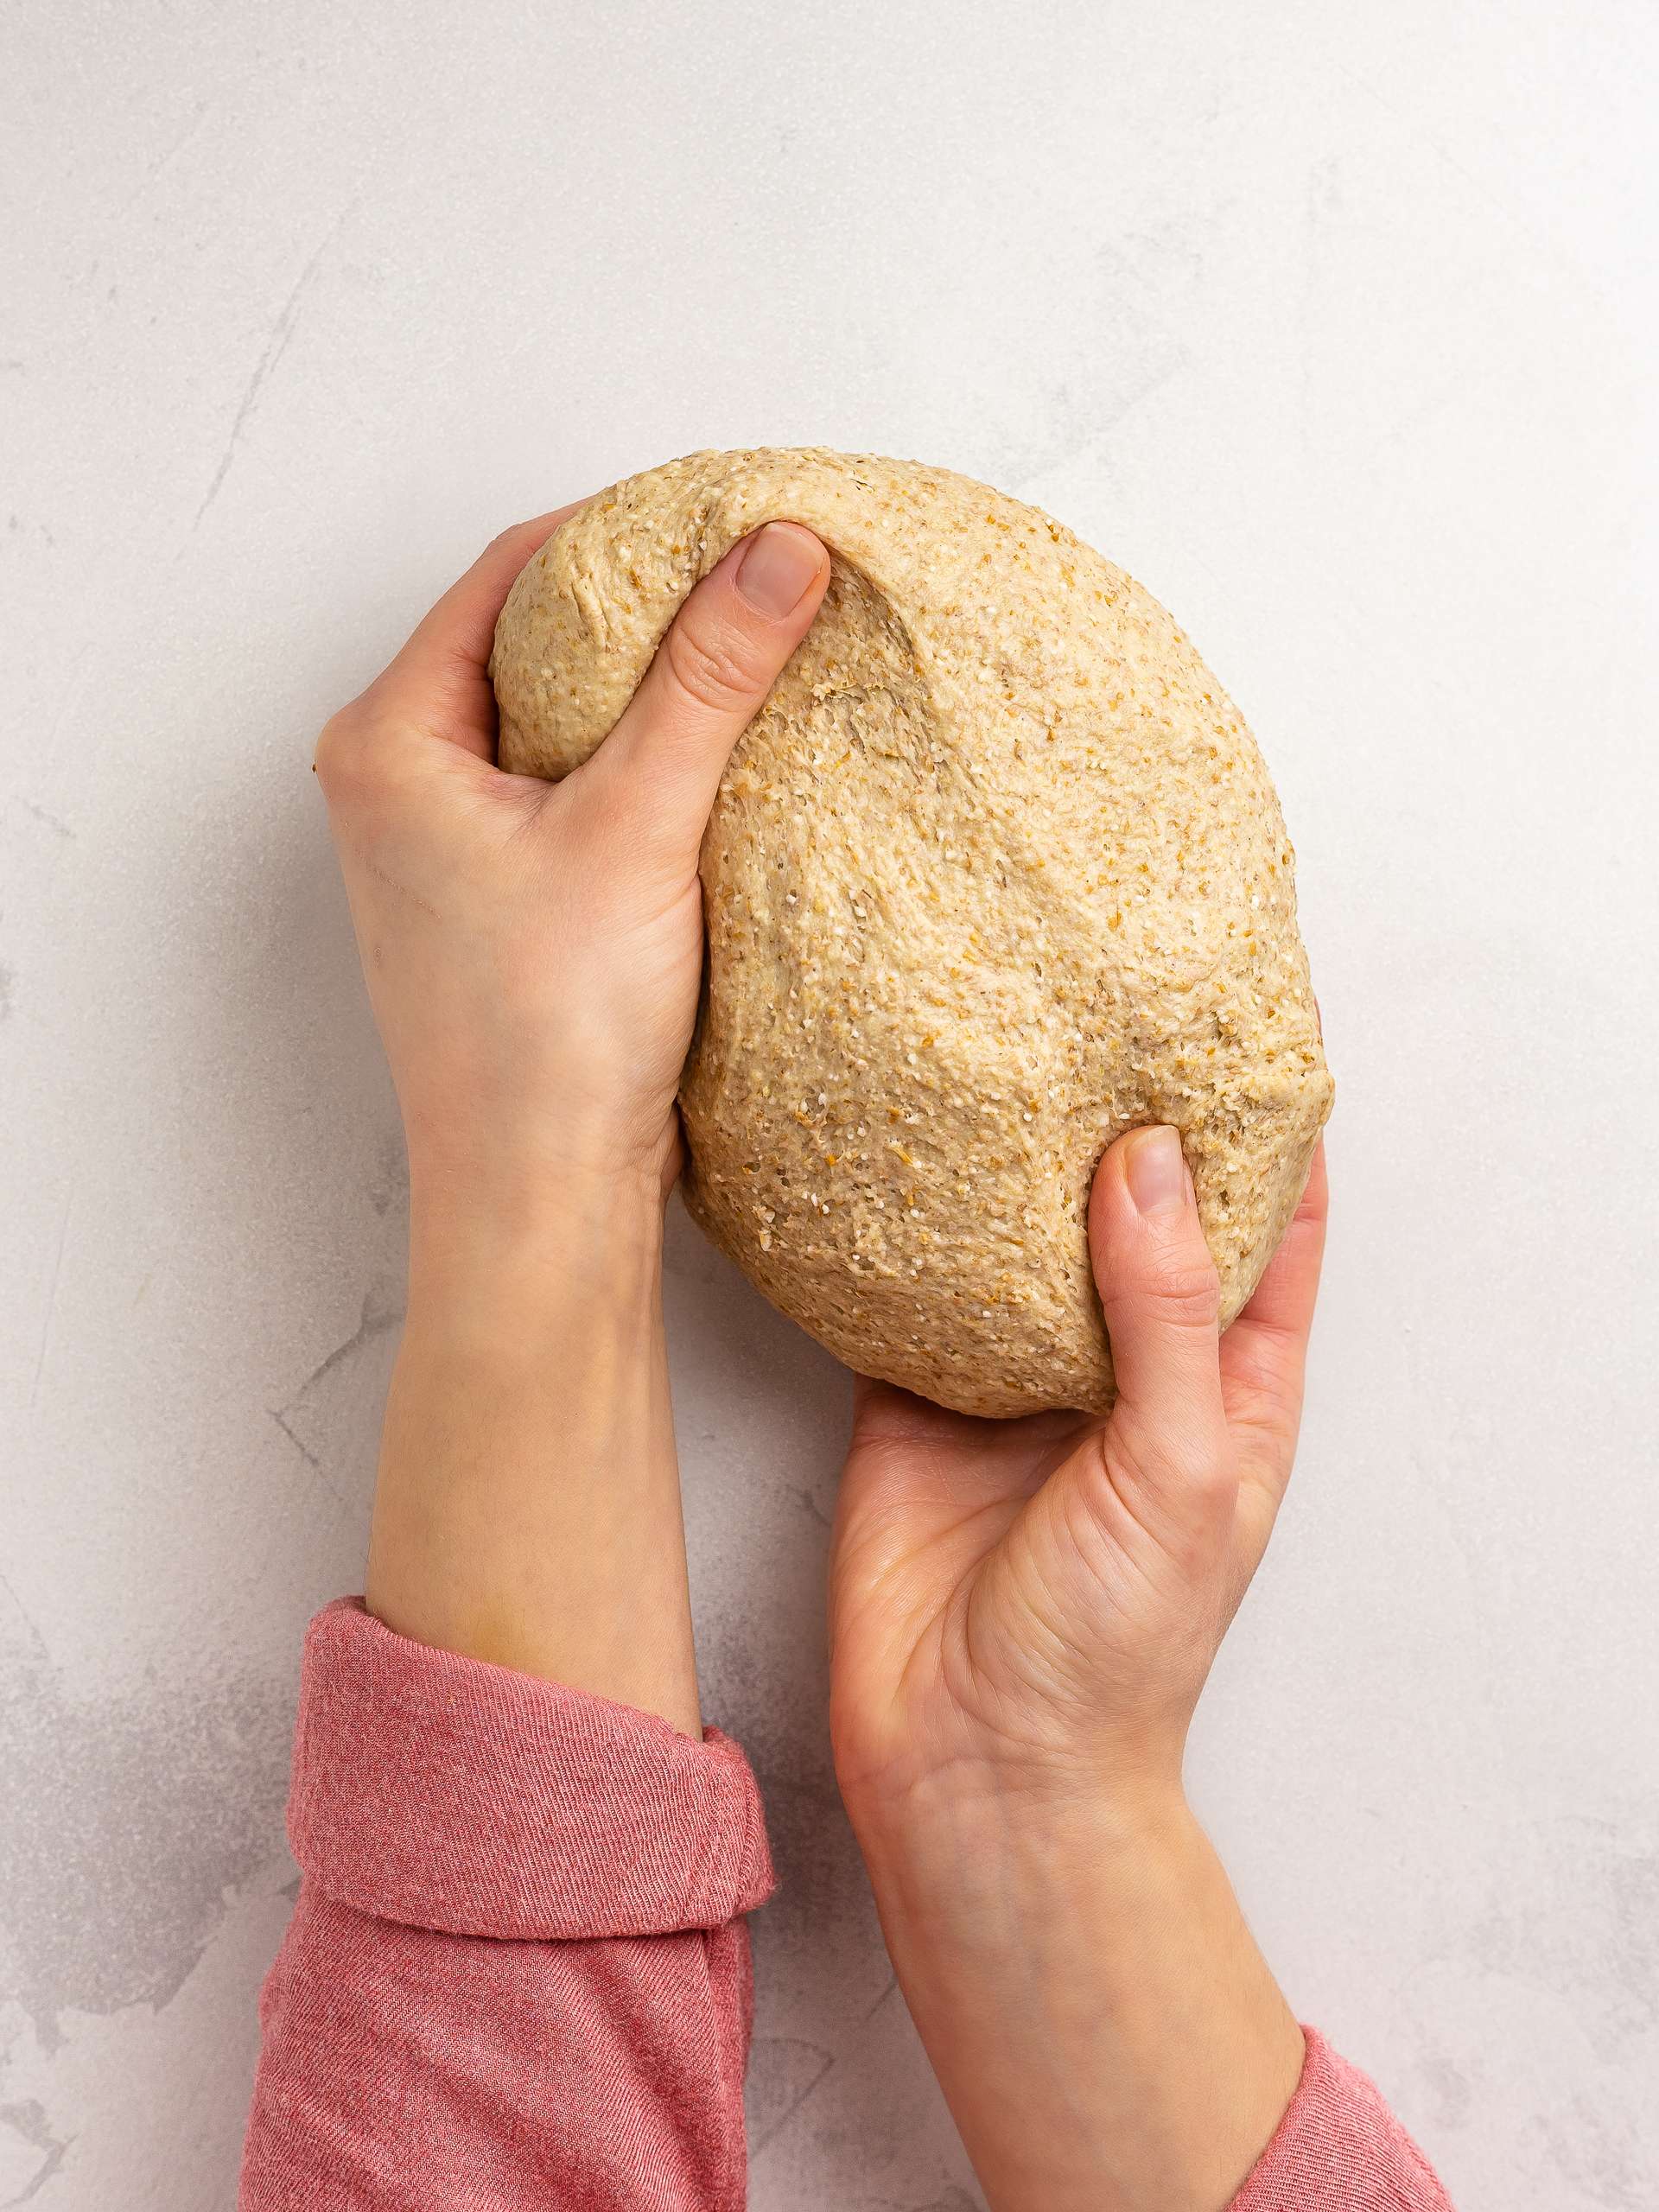 kneading barley rusks dough by hand